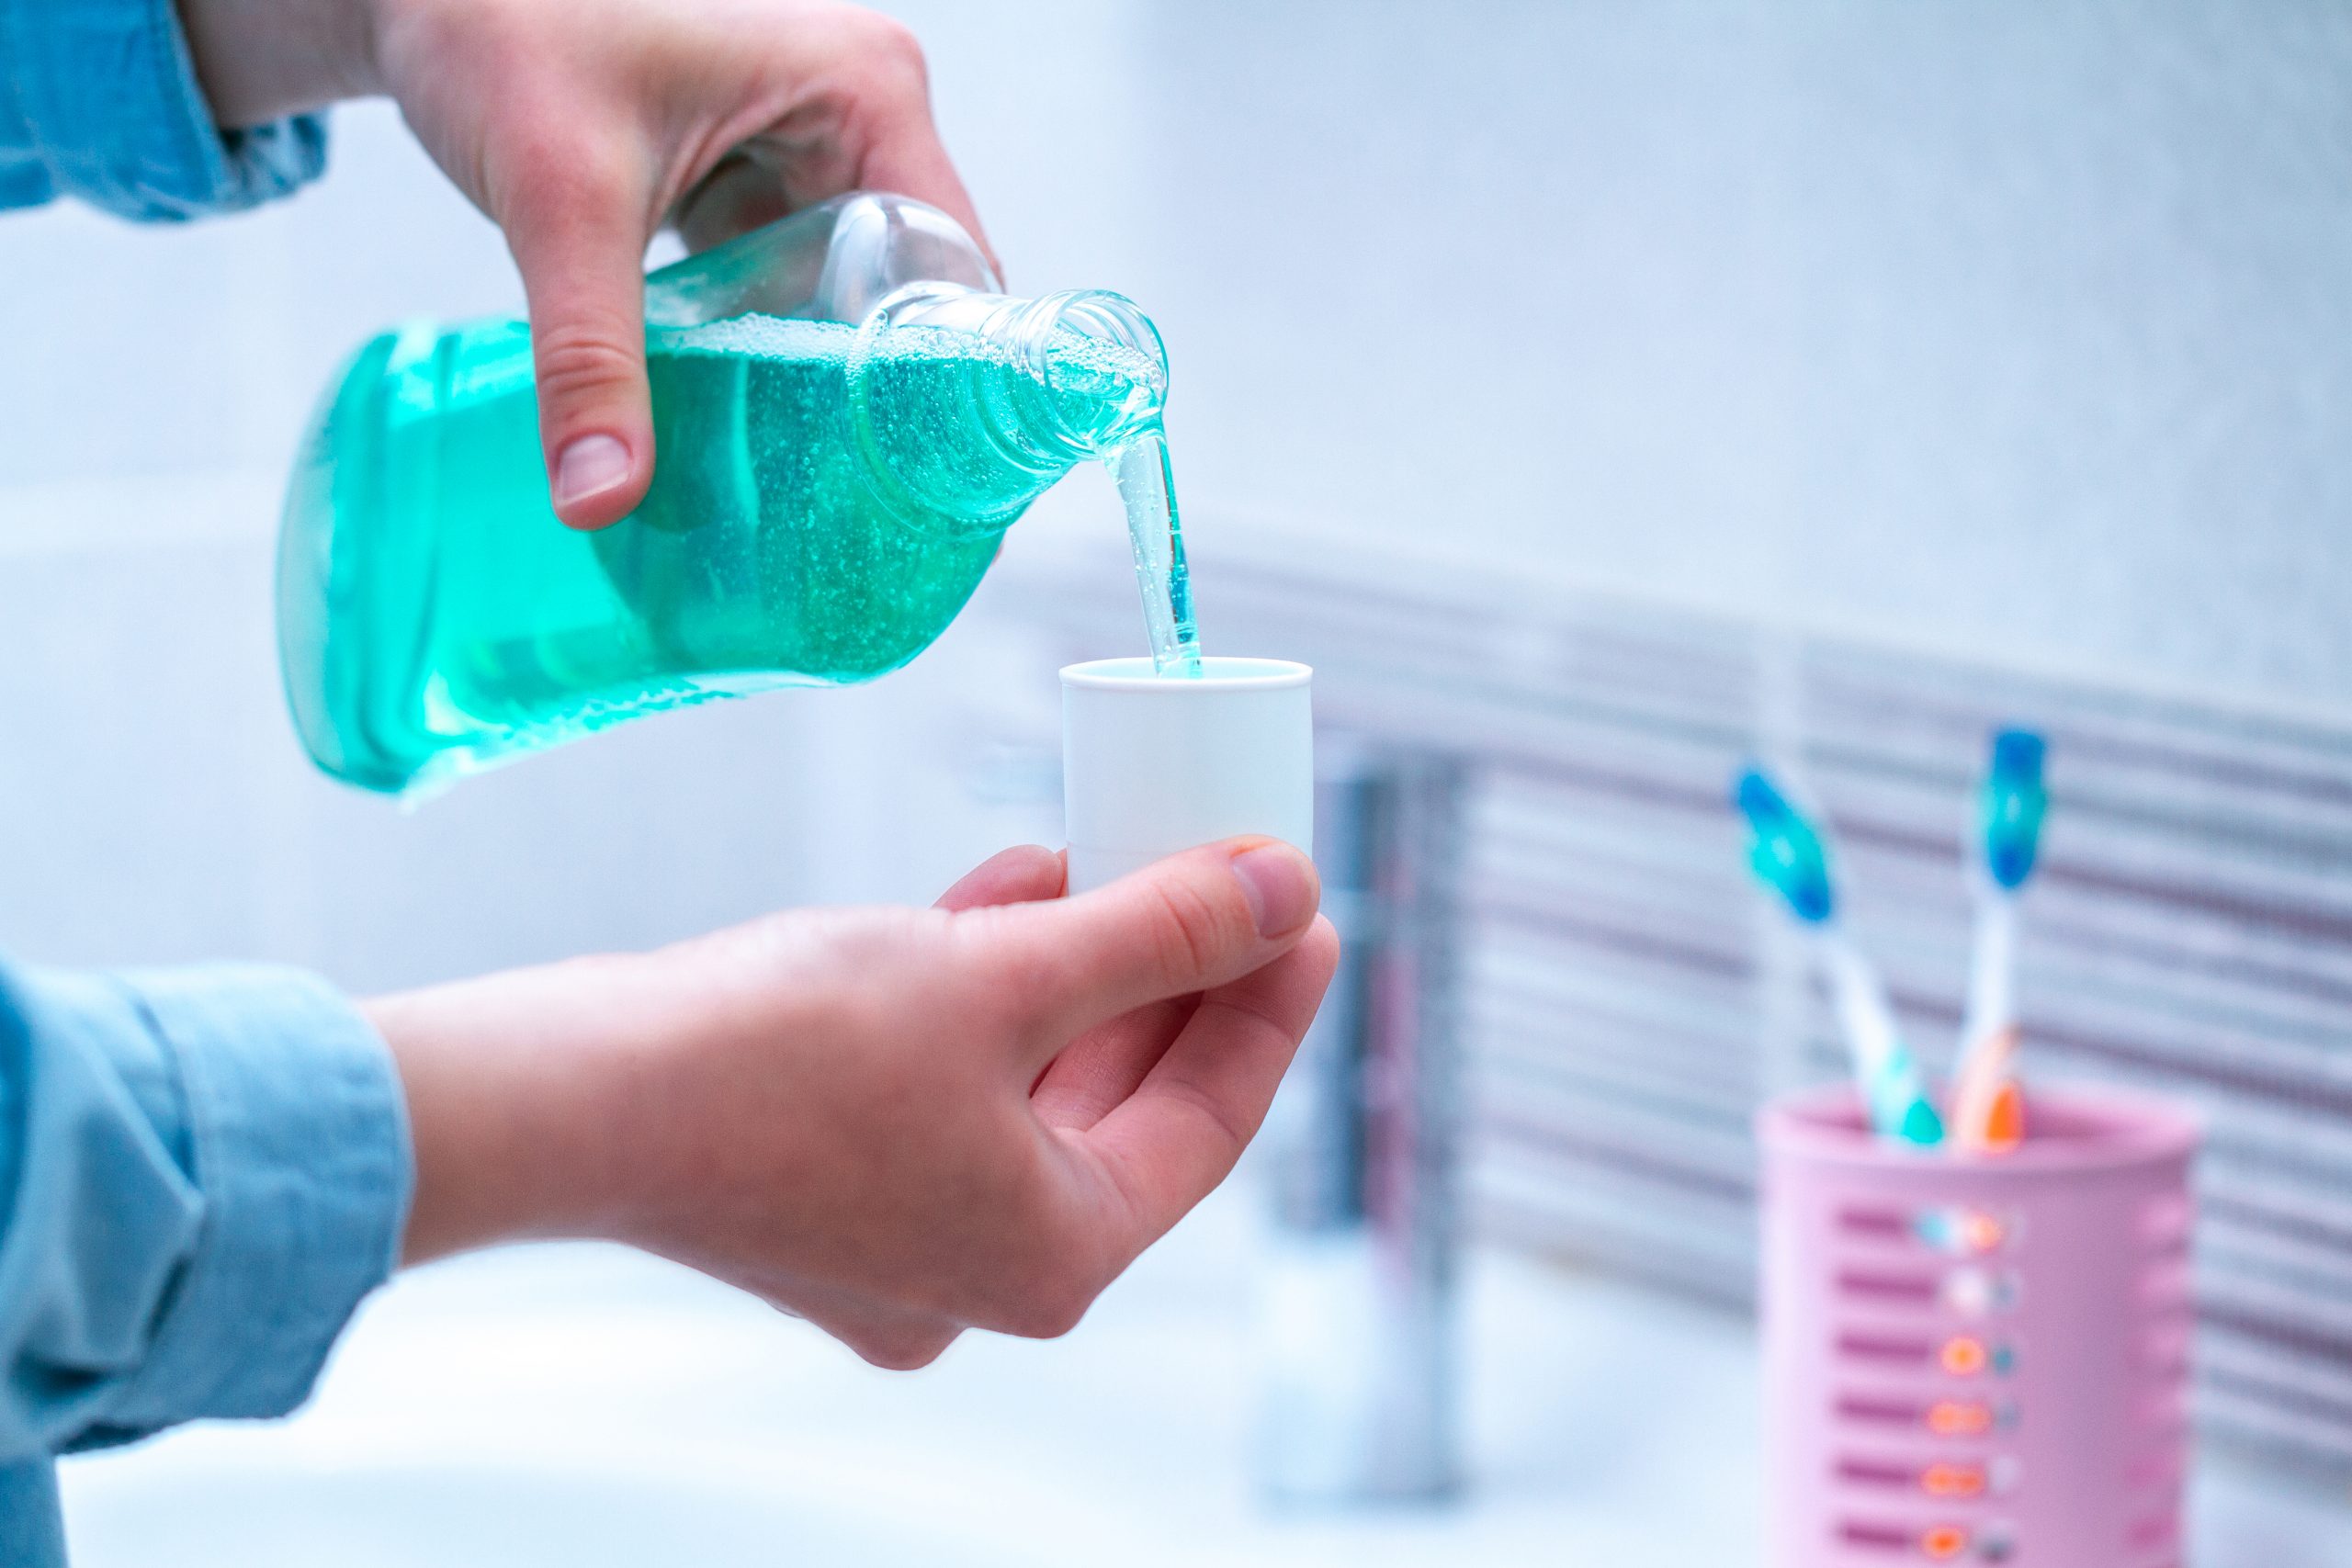 Stocked up on mouthwash? Research shows it could curb Covid